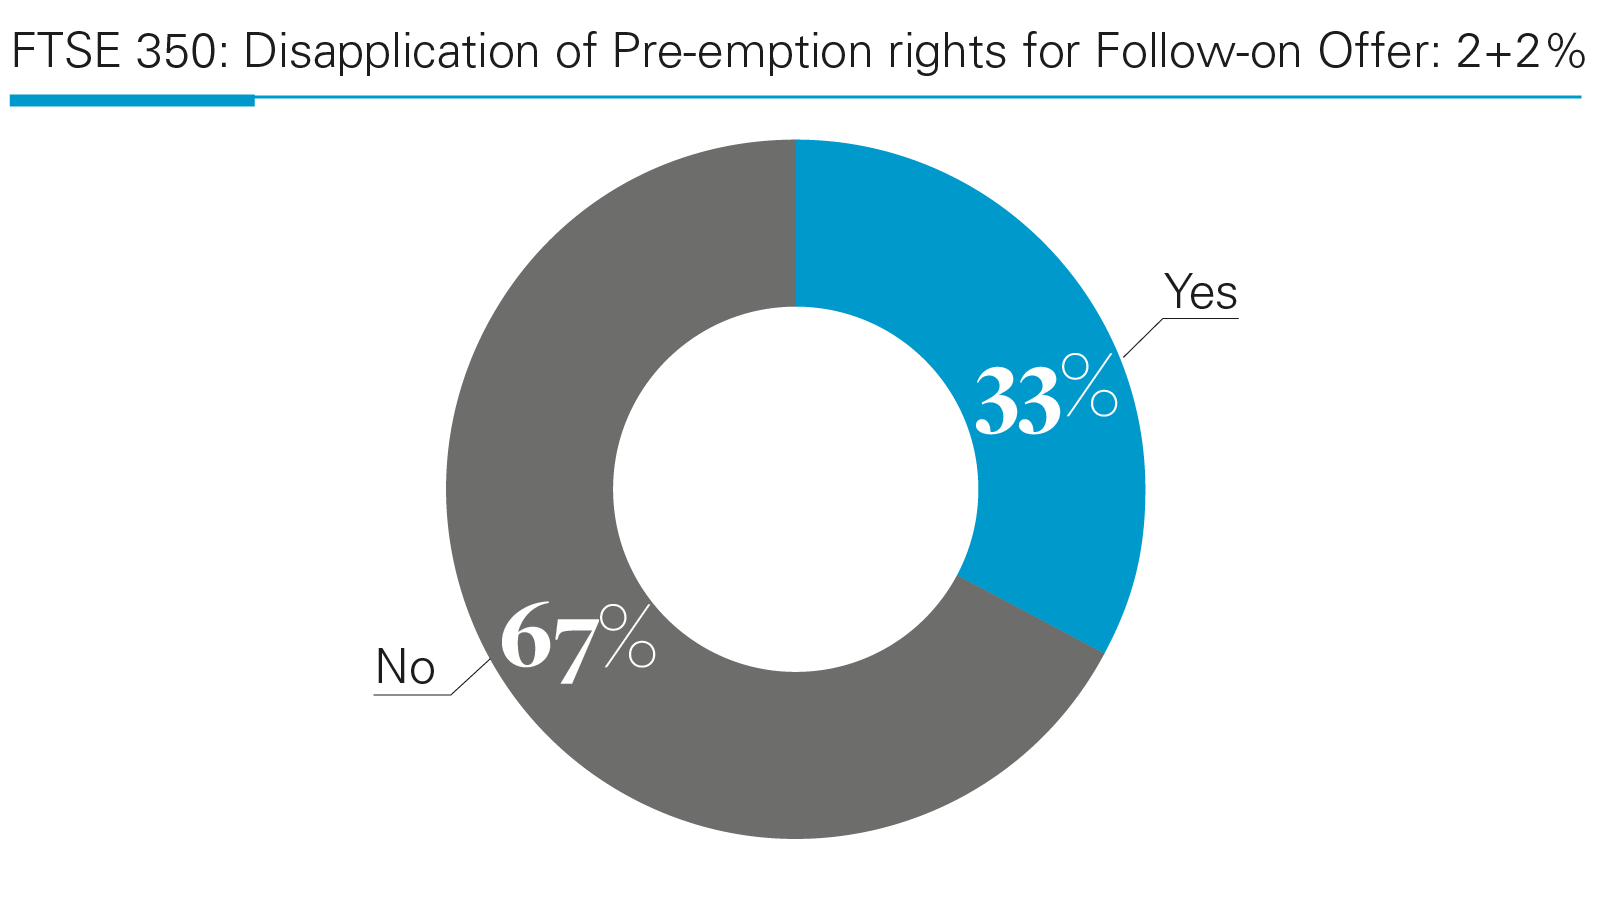 FTSE 350: Disapplication of Pre-emption rights for Follow-on Offer: 2+2% 